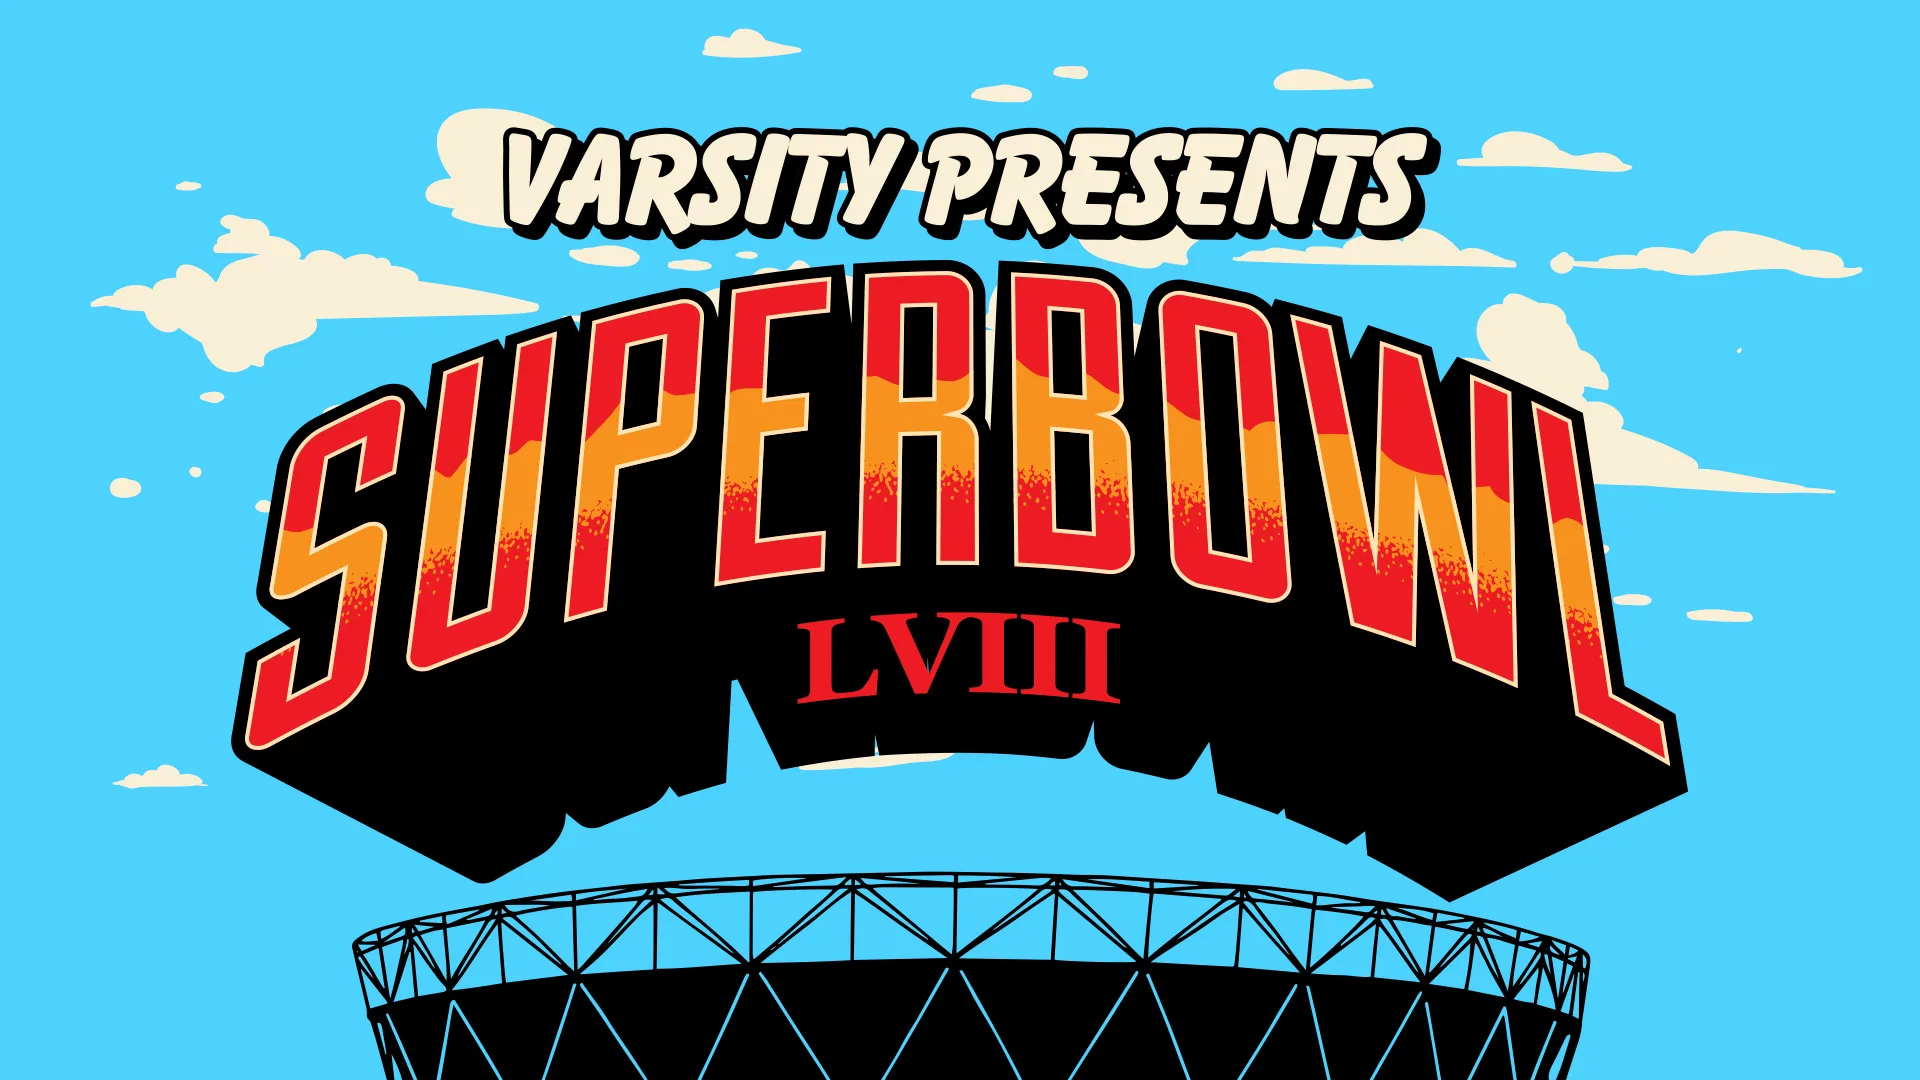 Varsity Presents Super Bowl LVIII Live From Las Vegas. Join The Action!